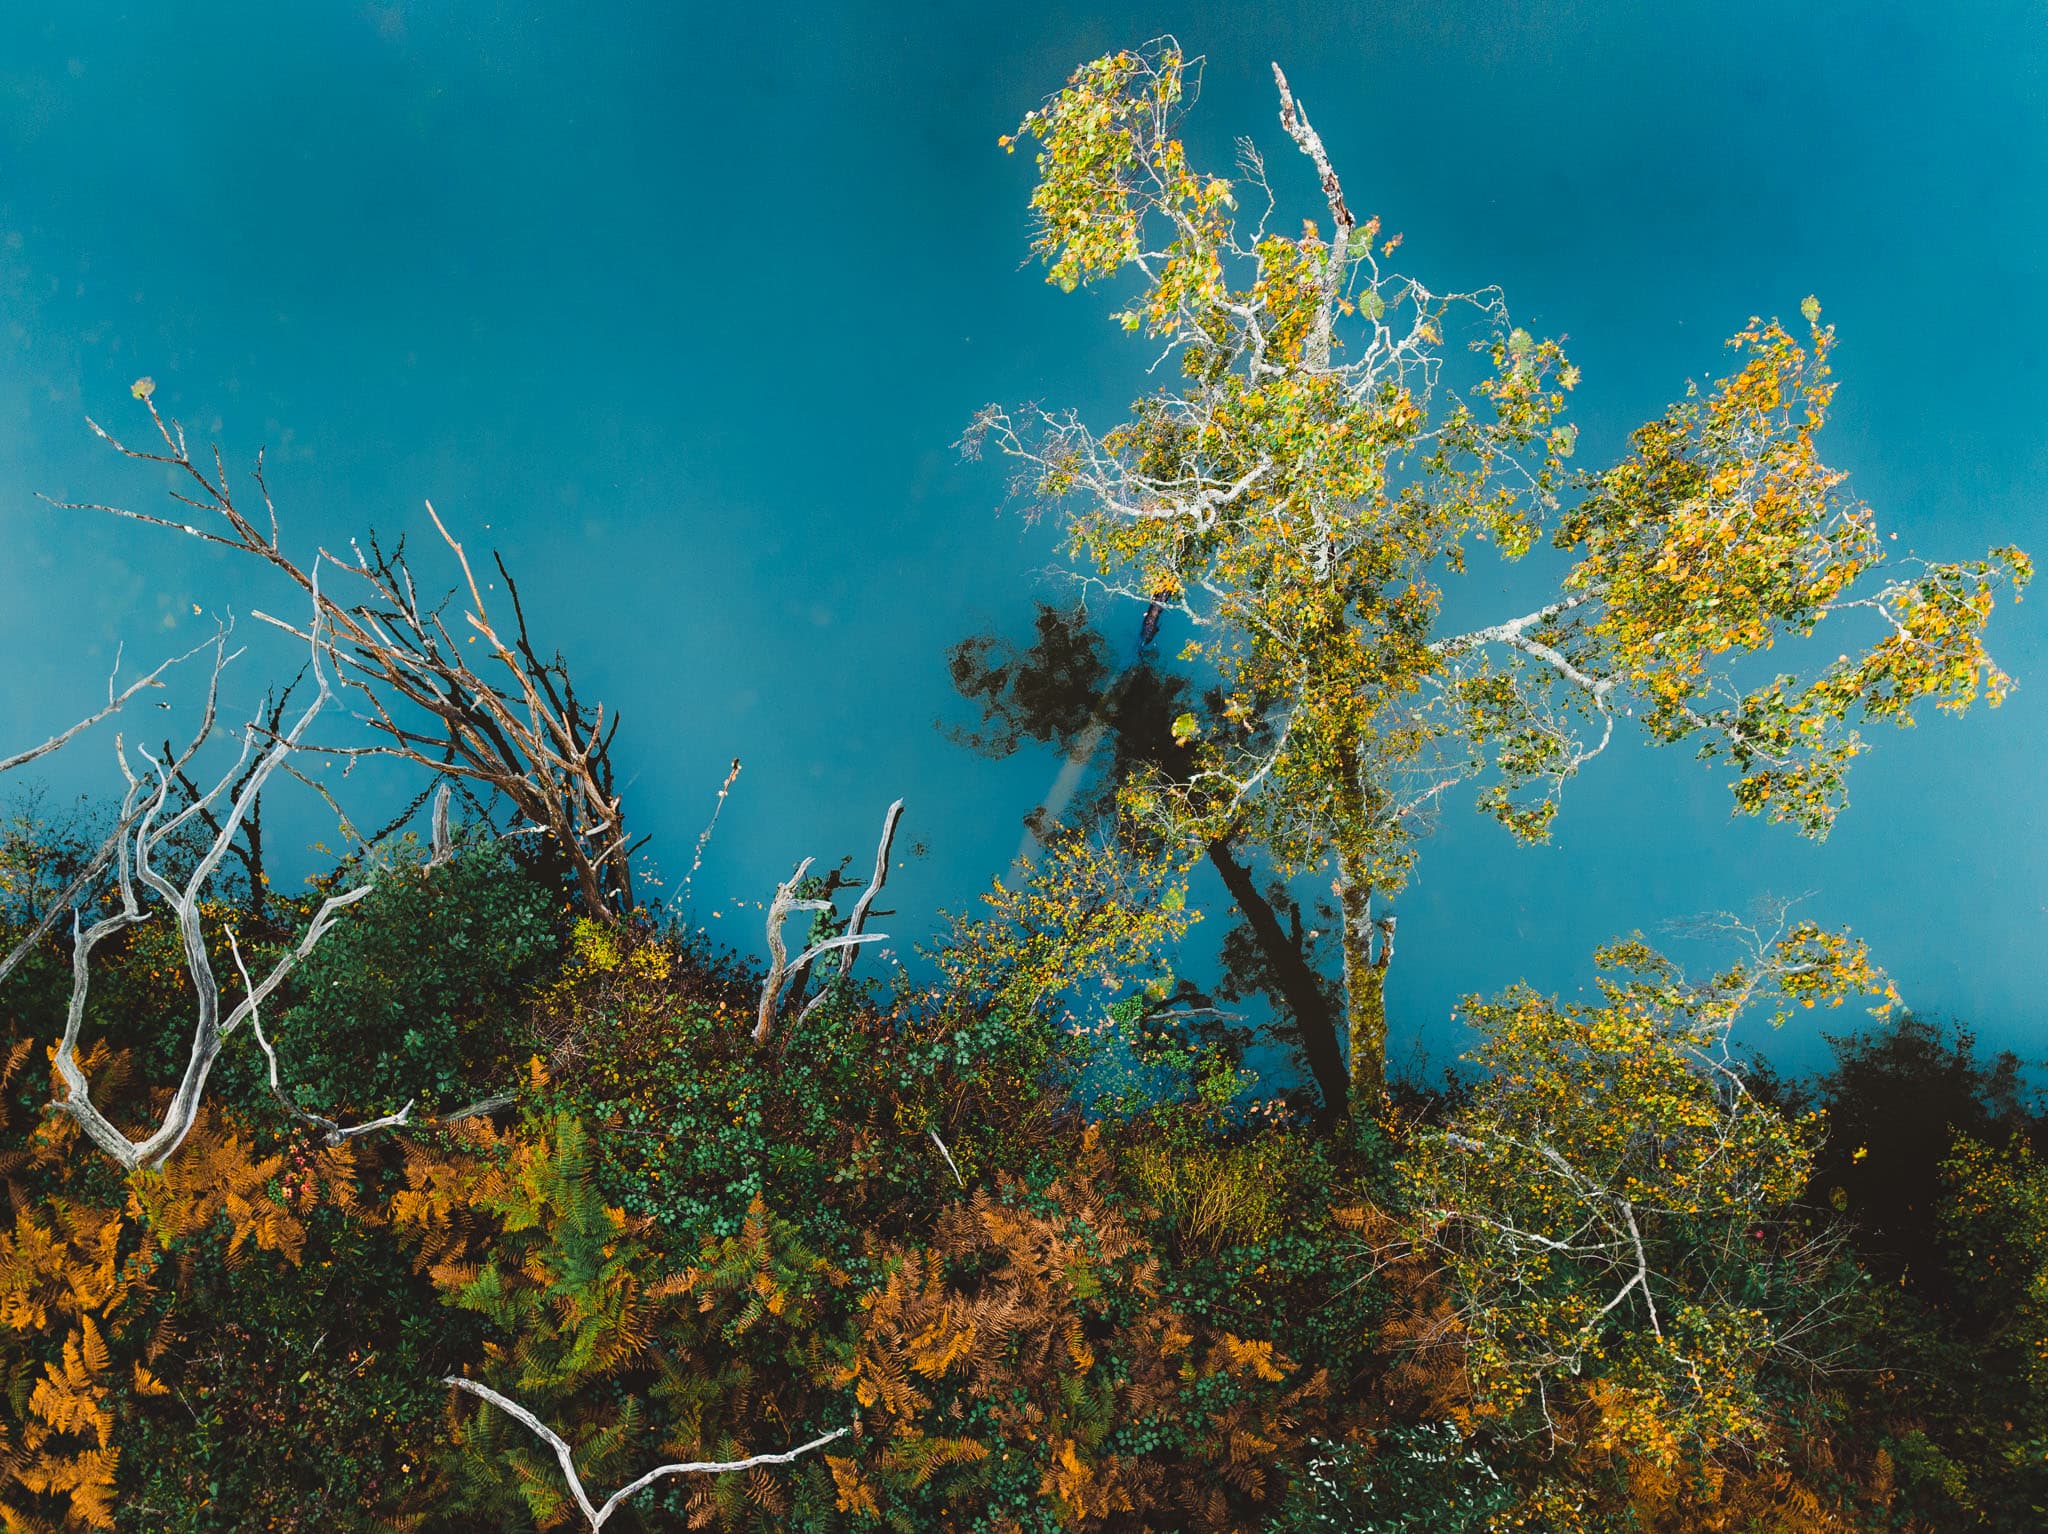 Top down aerial photo of bleached white dead branches overhanging a sky blue lake and autumn foliage in deep greens, yellows and oranges